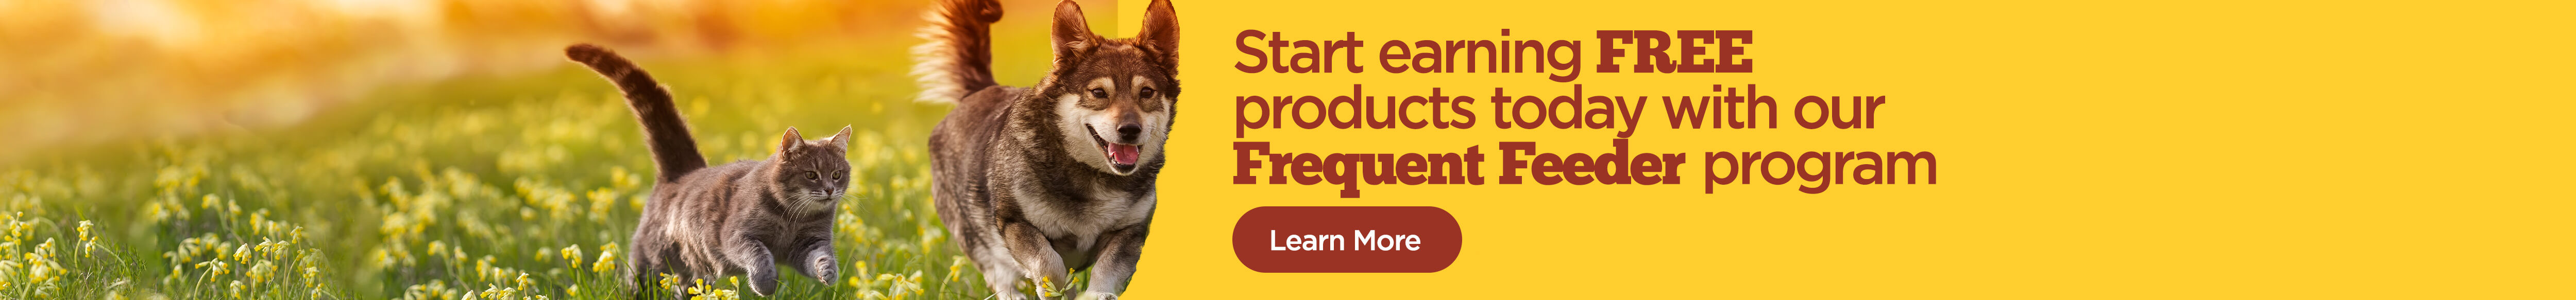 Start earning free products today with our Frequent Feeder program